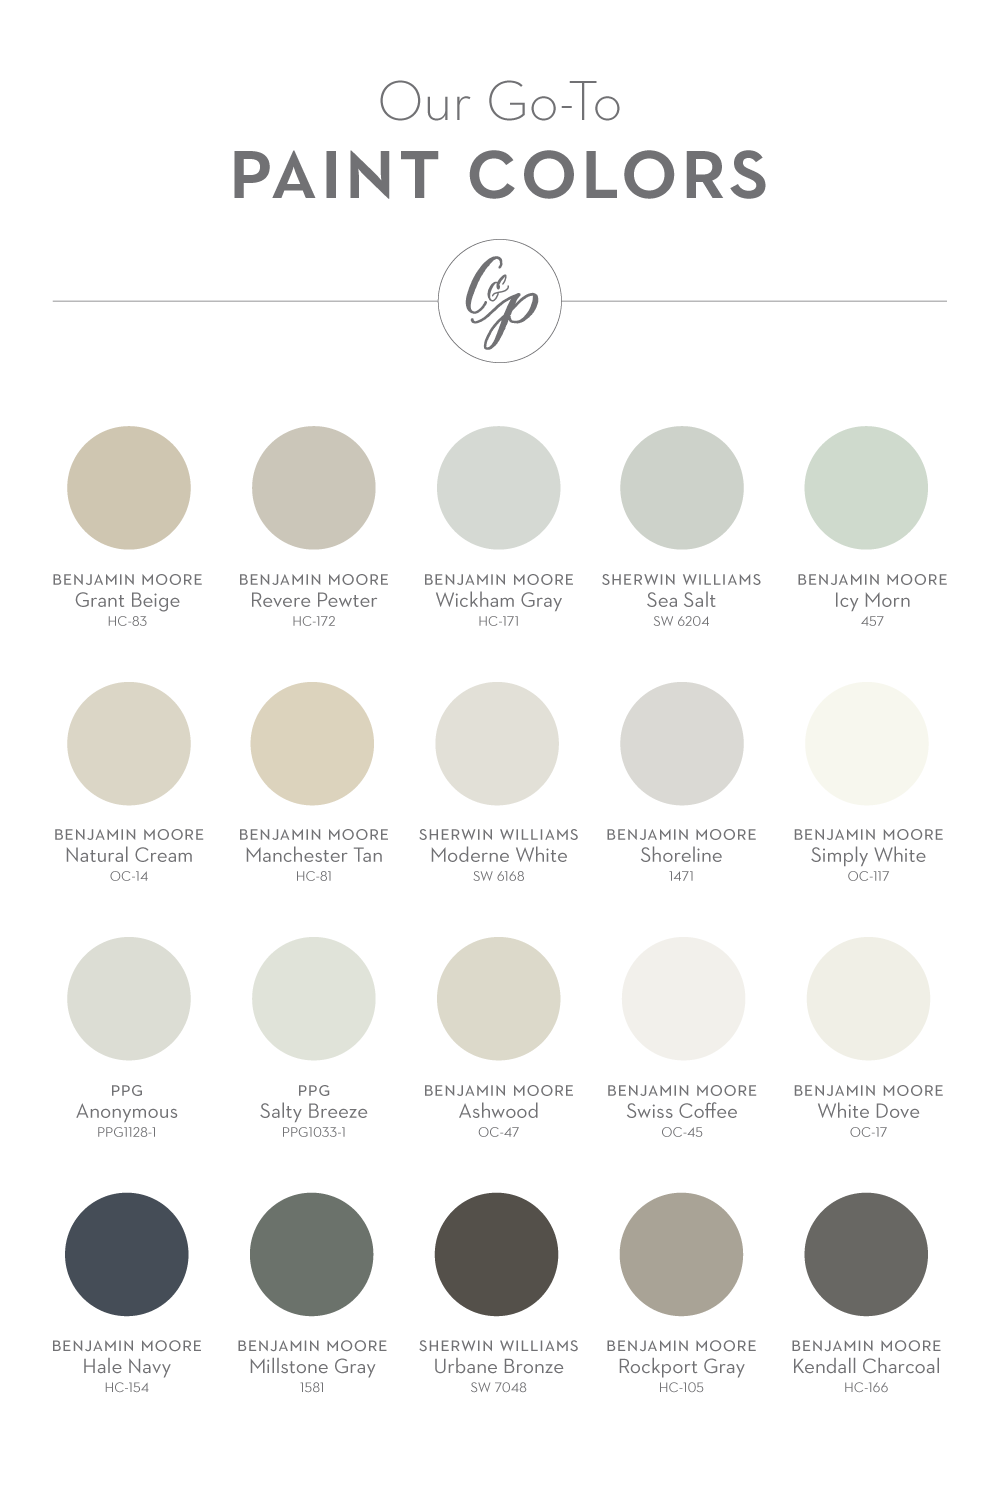 Our Go To Paint Colors Charlton Park,Living Room Interior Decor Styles